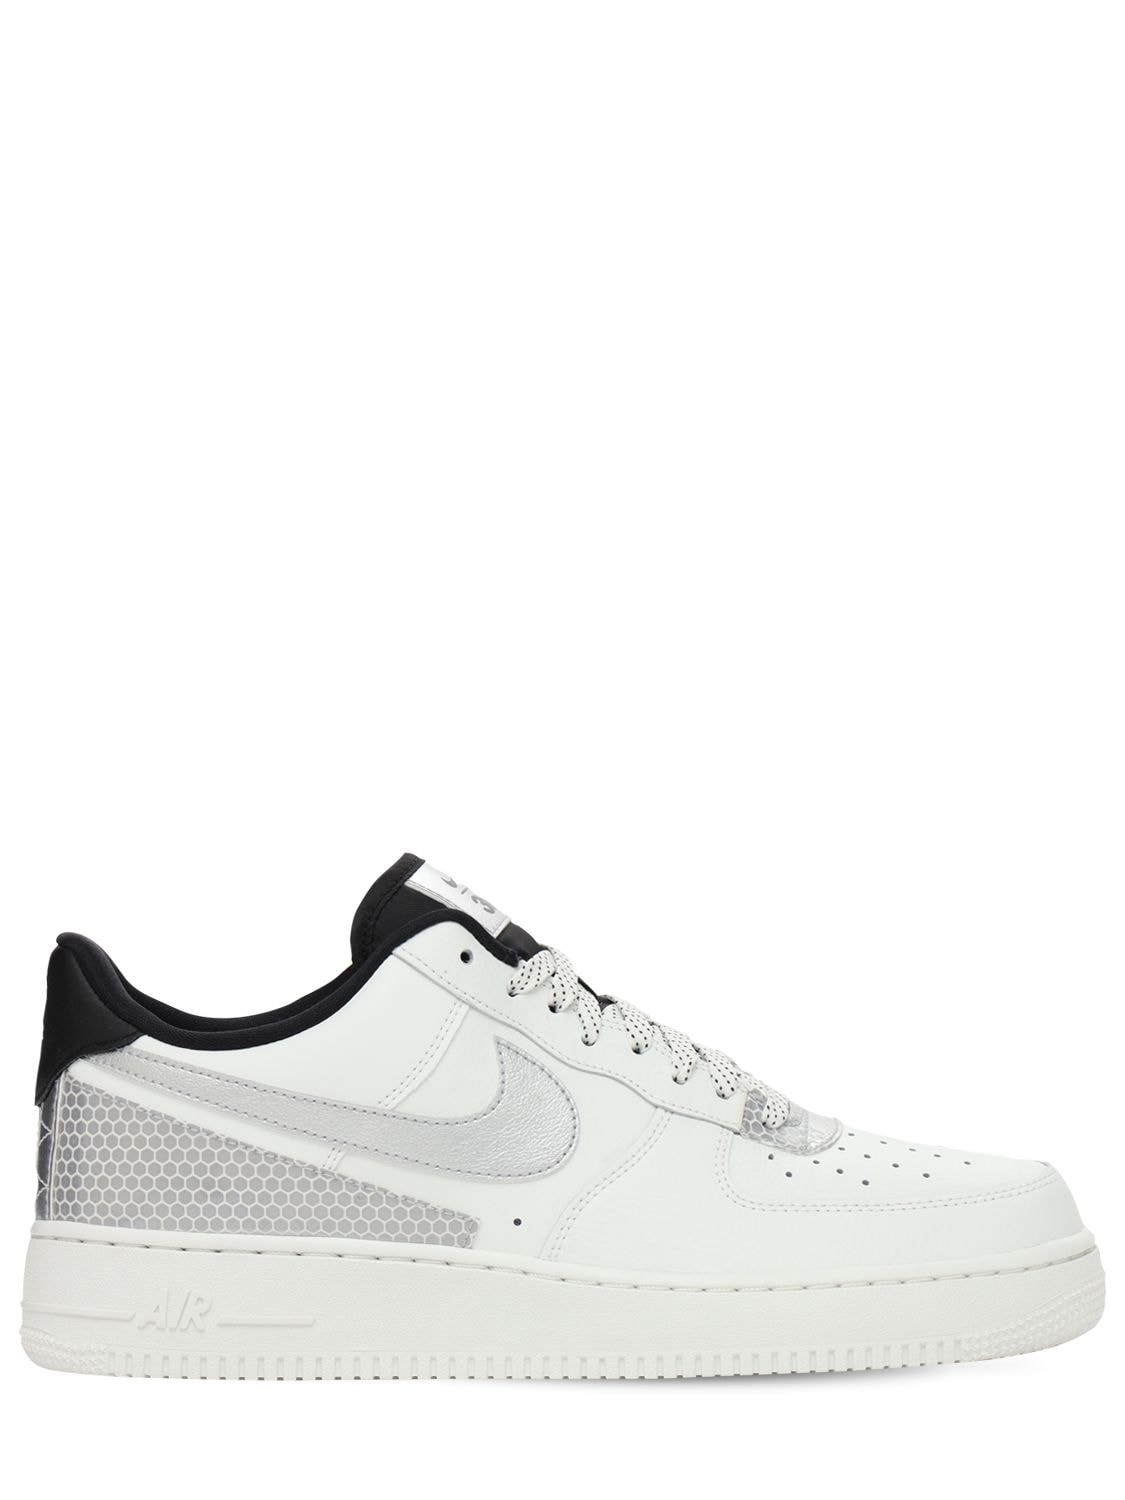 where to buy air force 1 shoes